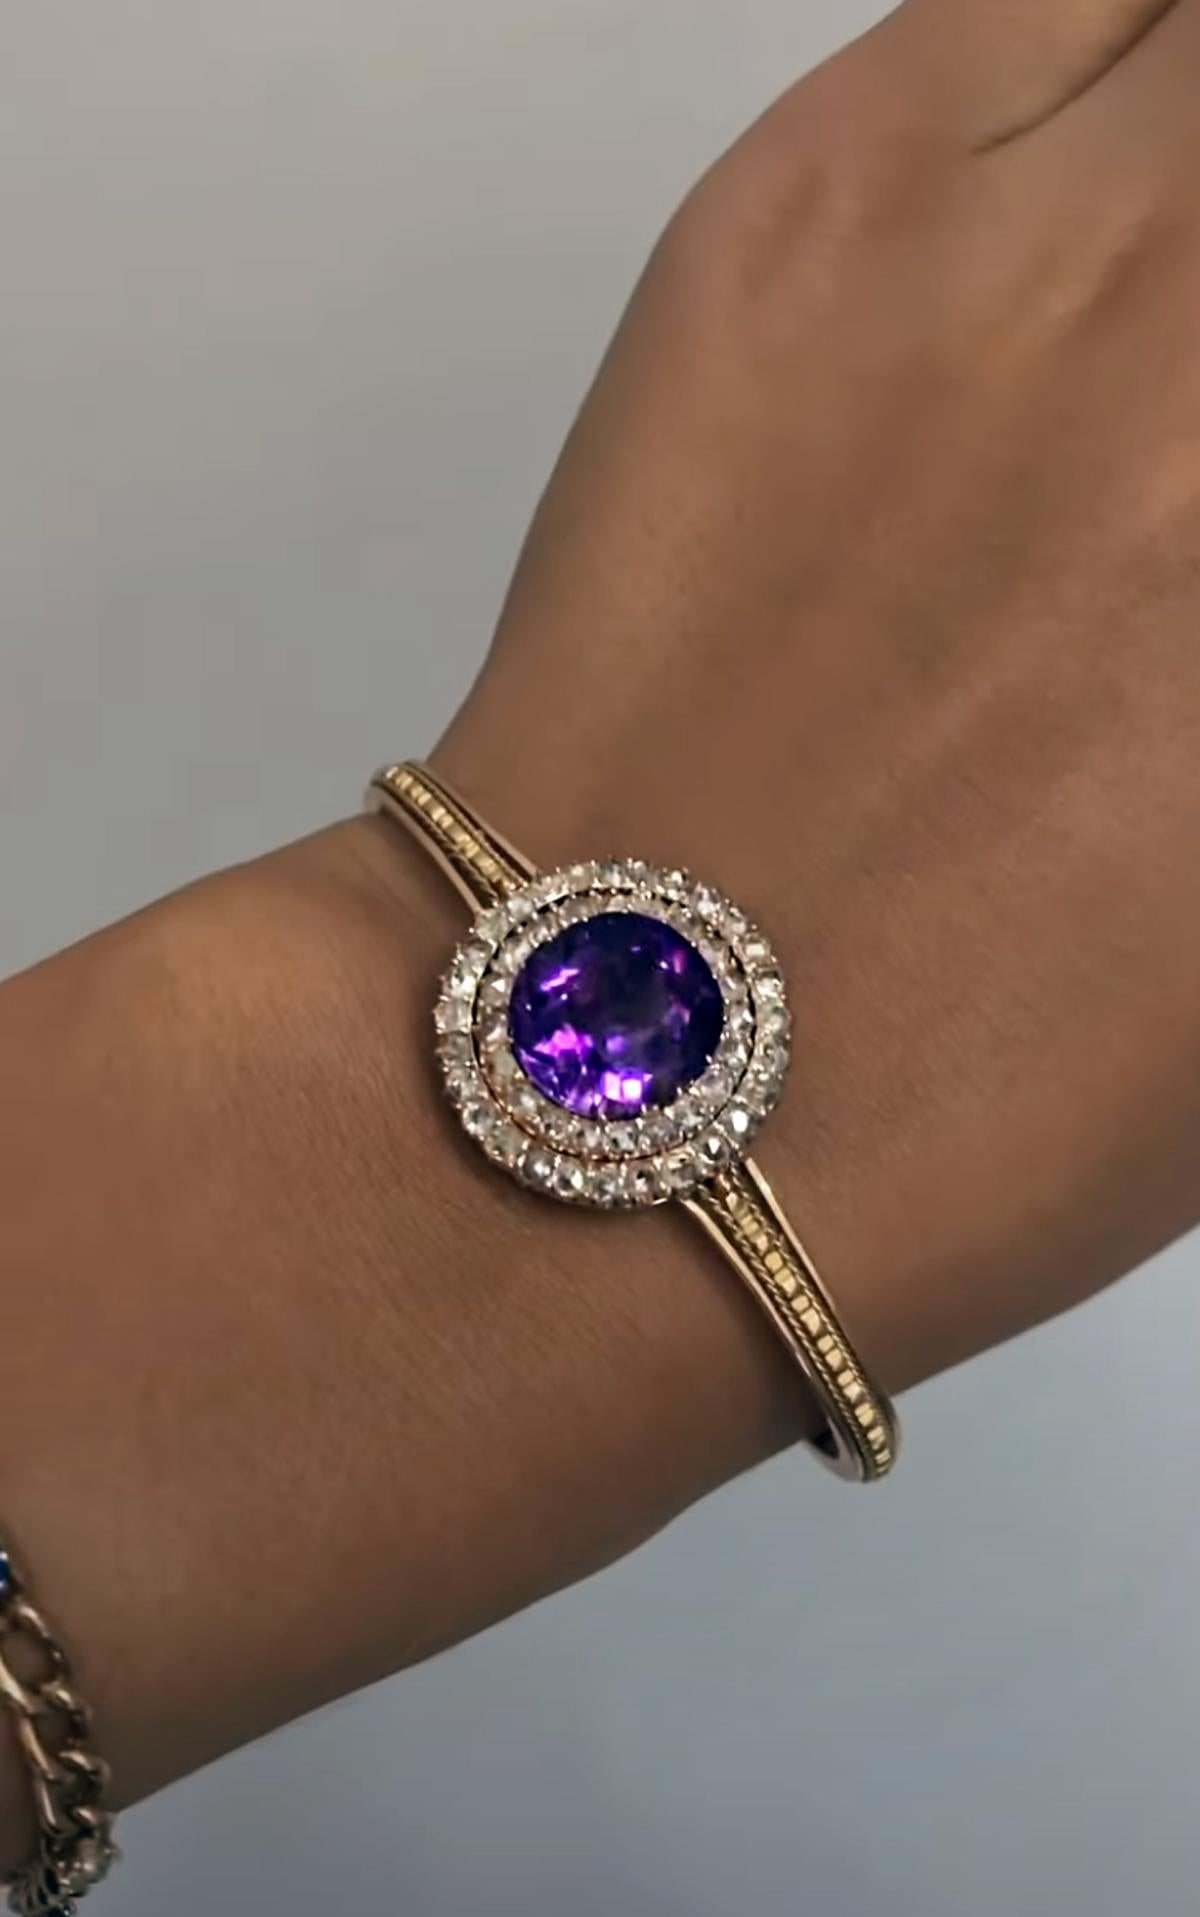 Made in Saint Petersburg, Russia, circa 1890.
The 14K gold bangle bracelet is centered with an excellent Siberian amethyst of a velvety pinkish royal purple color. The amethyst is surrounded by two rows of sparkling old rose cut diamonds. The